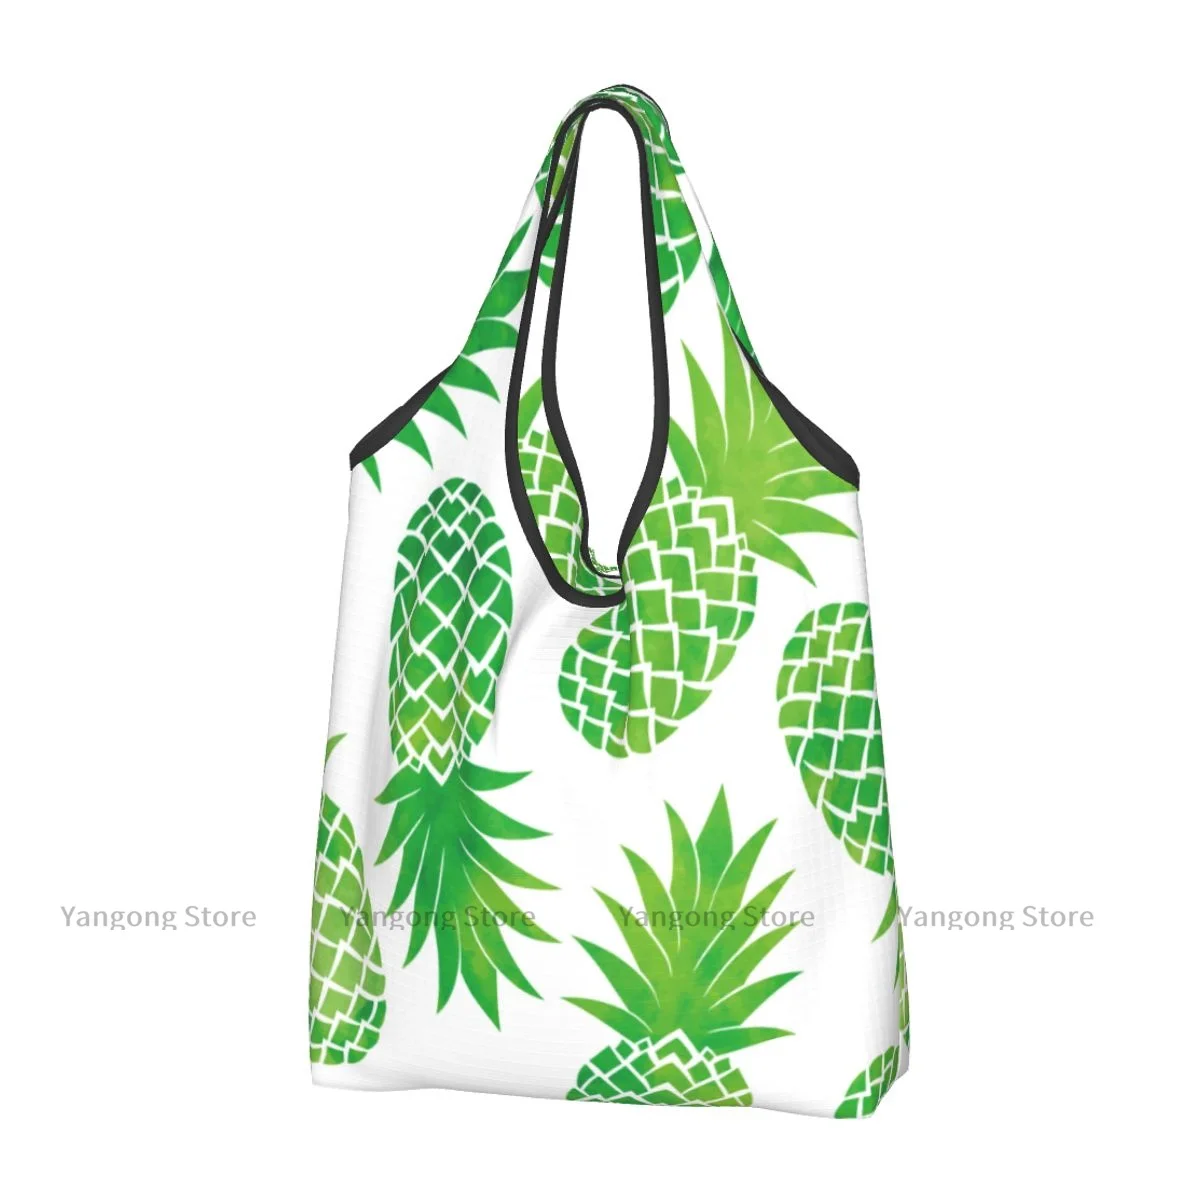 

Foldable Shopping Bag Pineapple Tote Folding Pouch Handbag Convenient Travel Grocery Bag